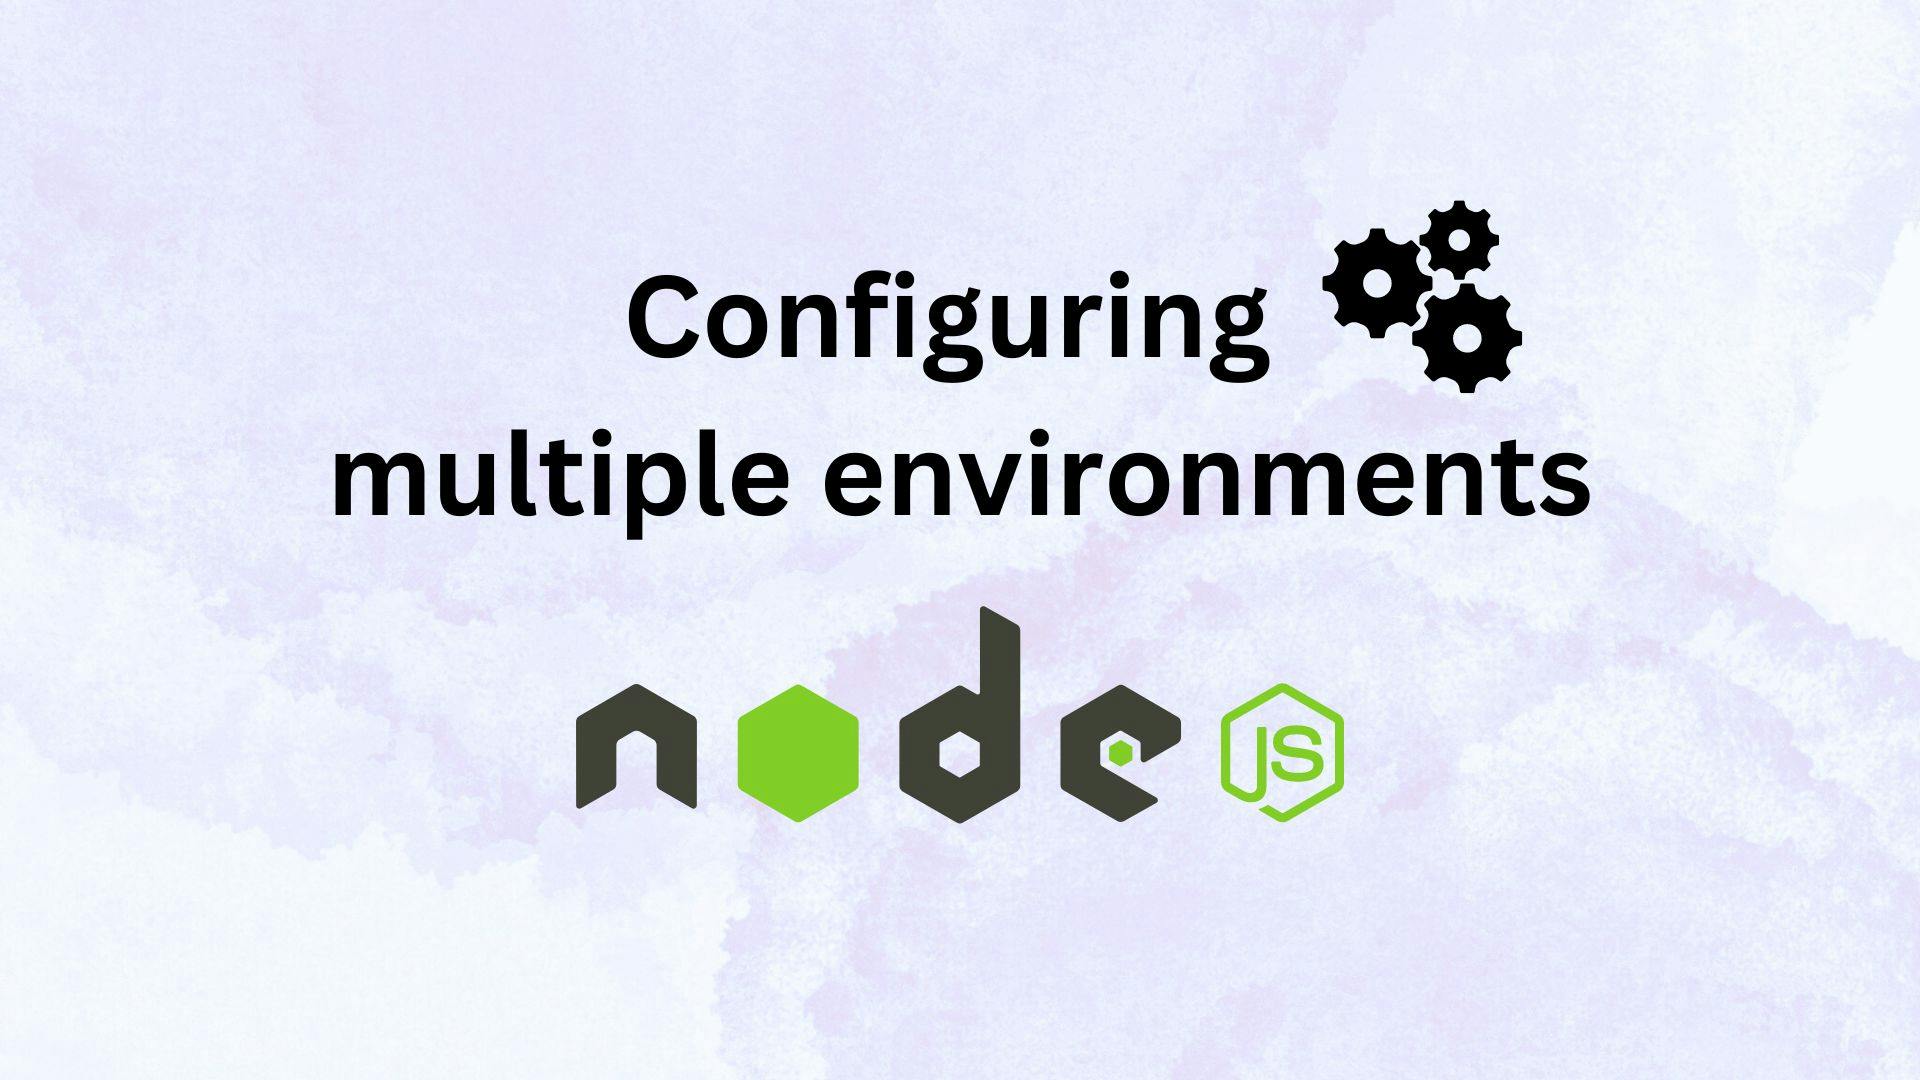 Configuring multiple environments with Nodejs